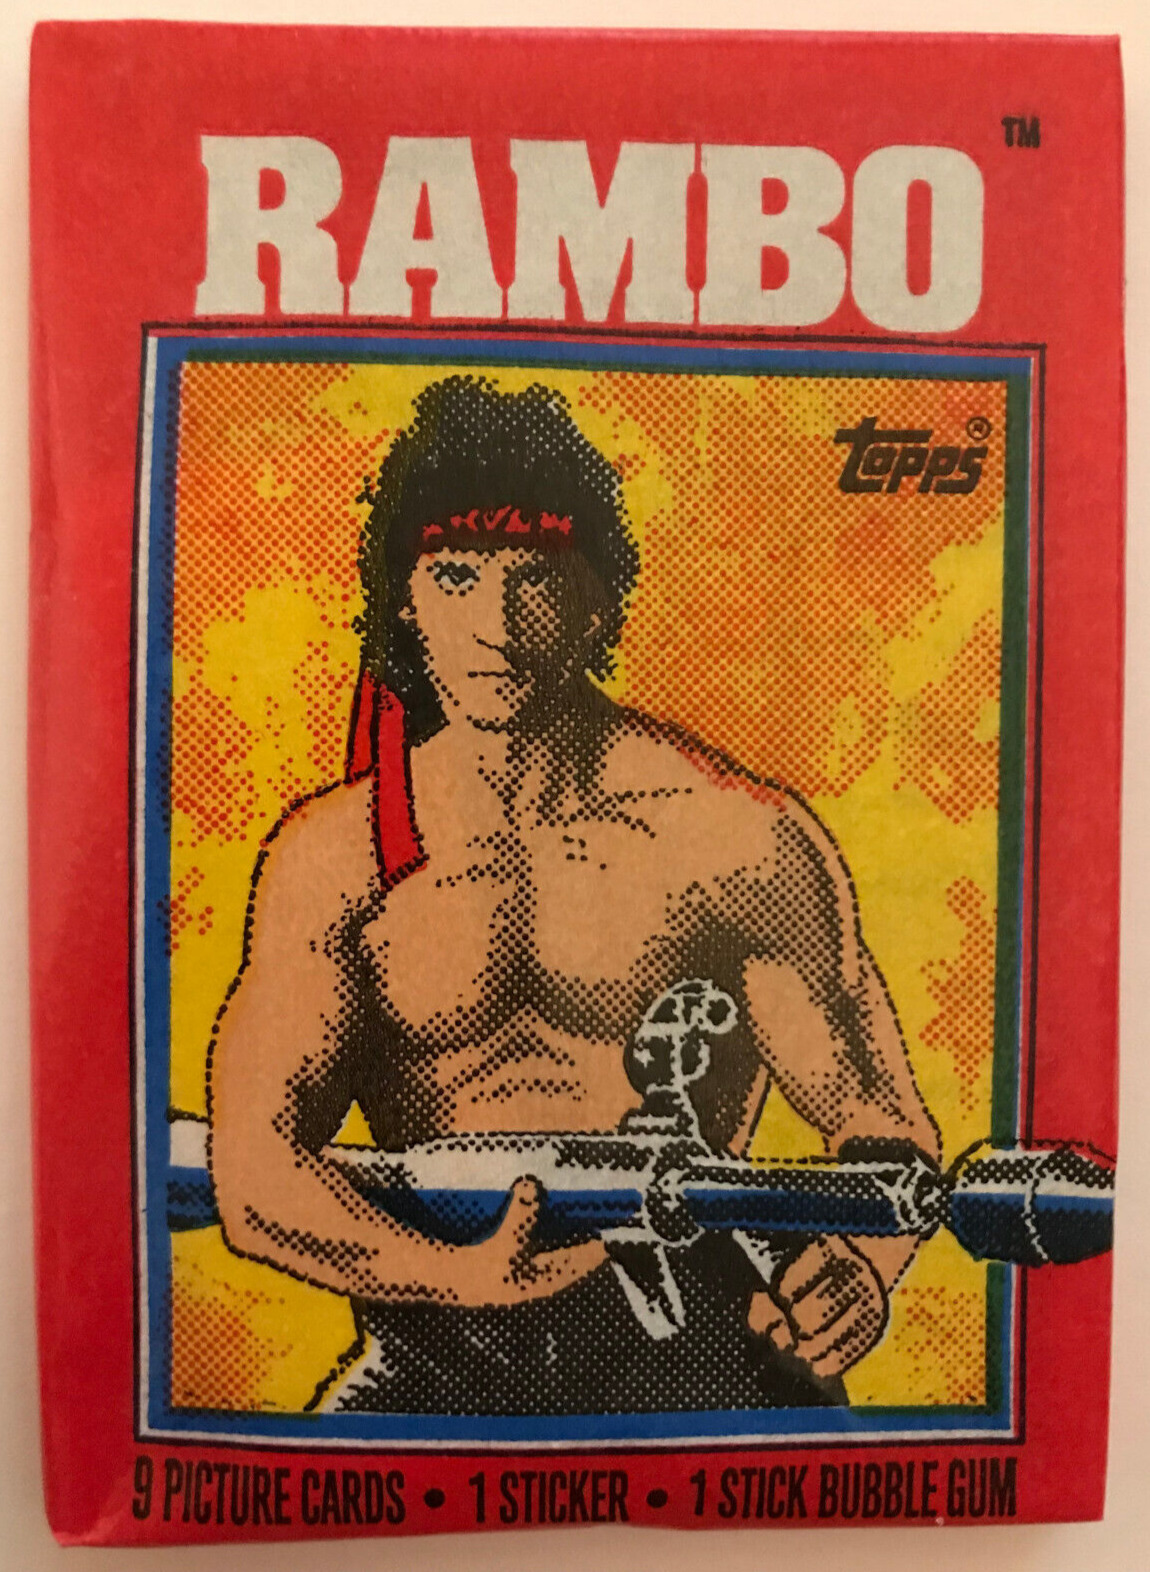 1985 Topps Rambo First Blood Part 2 Cards, 1 Sealed Wax PACK From Box, 9 Cards